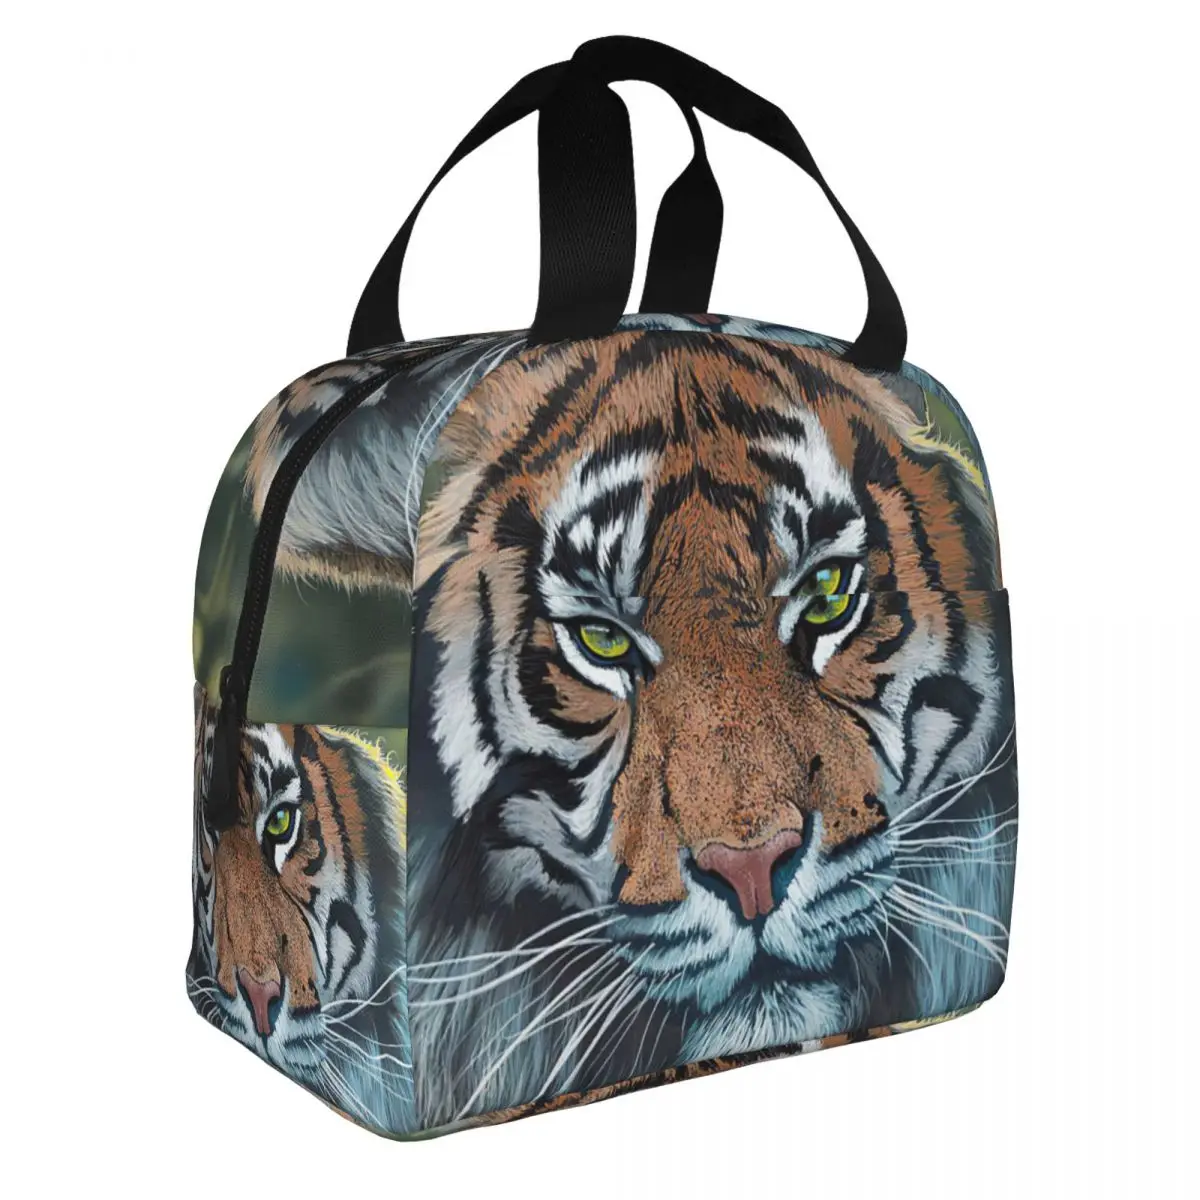 Tiger Tiger Portrait Lunch Bento Bags Portable Aluminum Foil thickened Thermal Cloth Lunch Bag for Women Men Boy